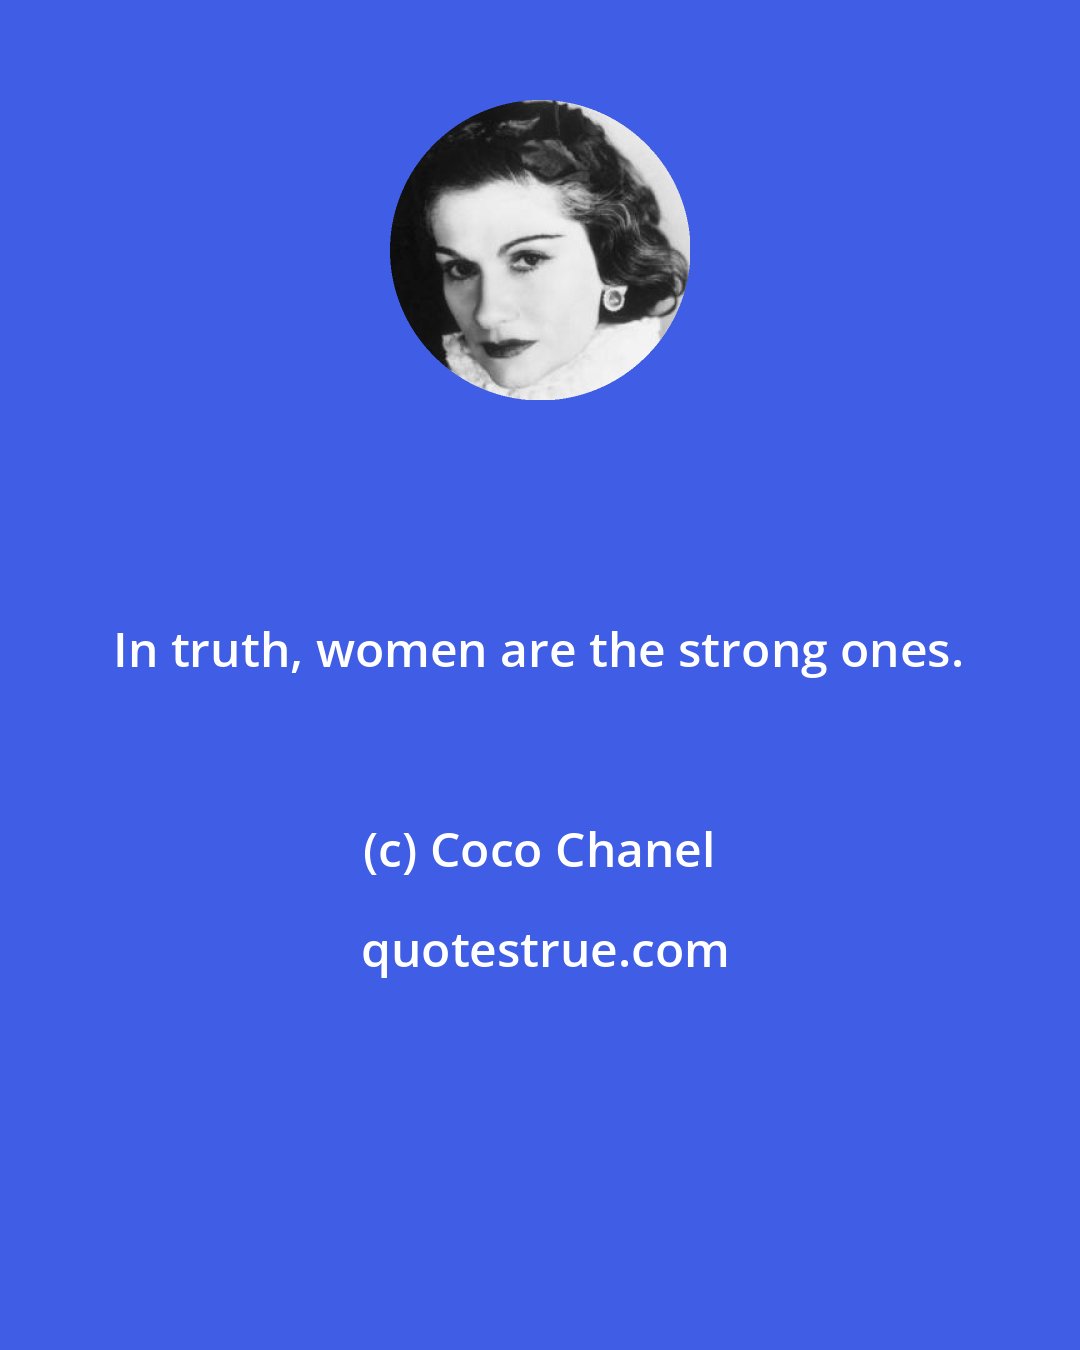 Coco Chanel: In truth, women are the strong ones.